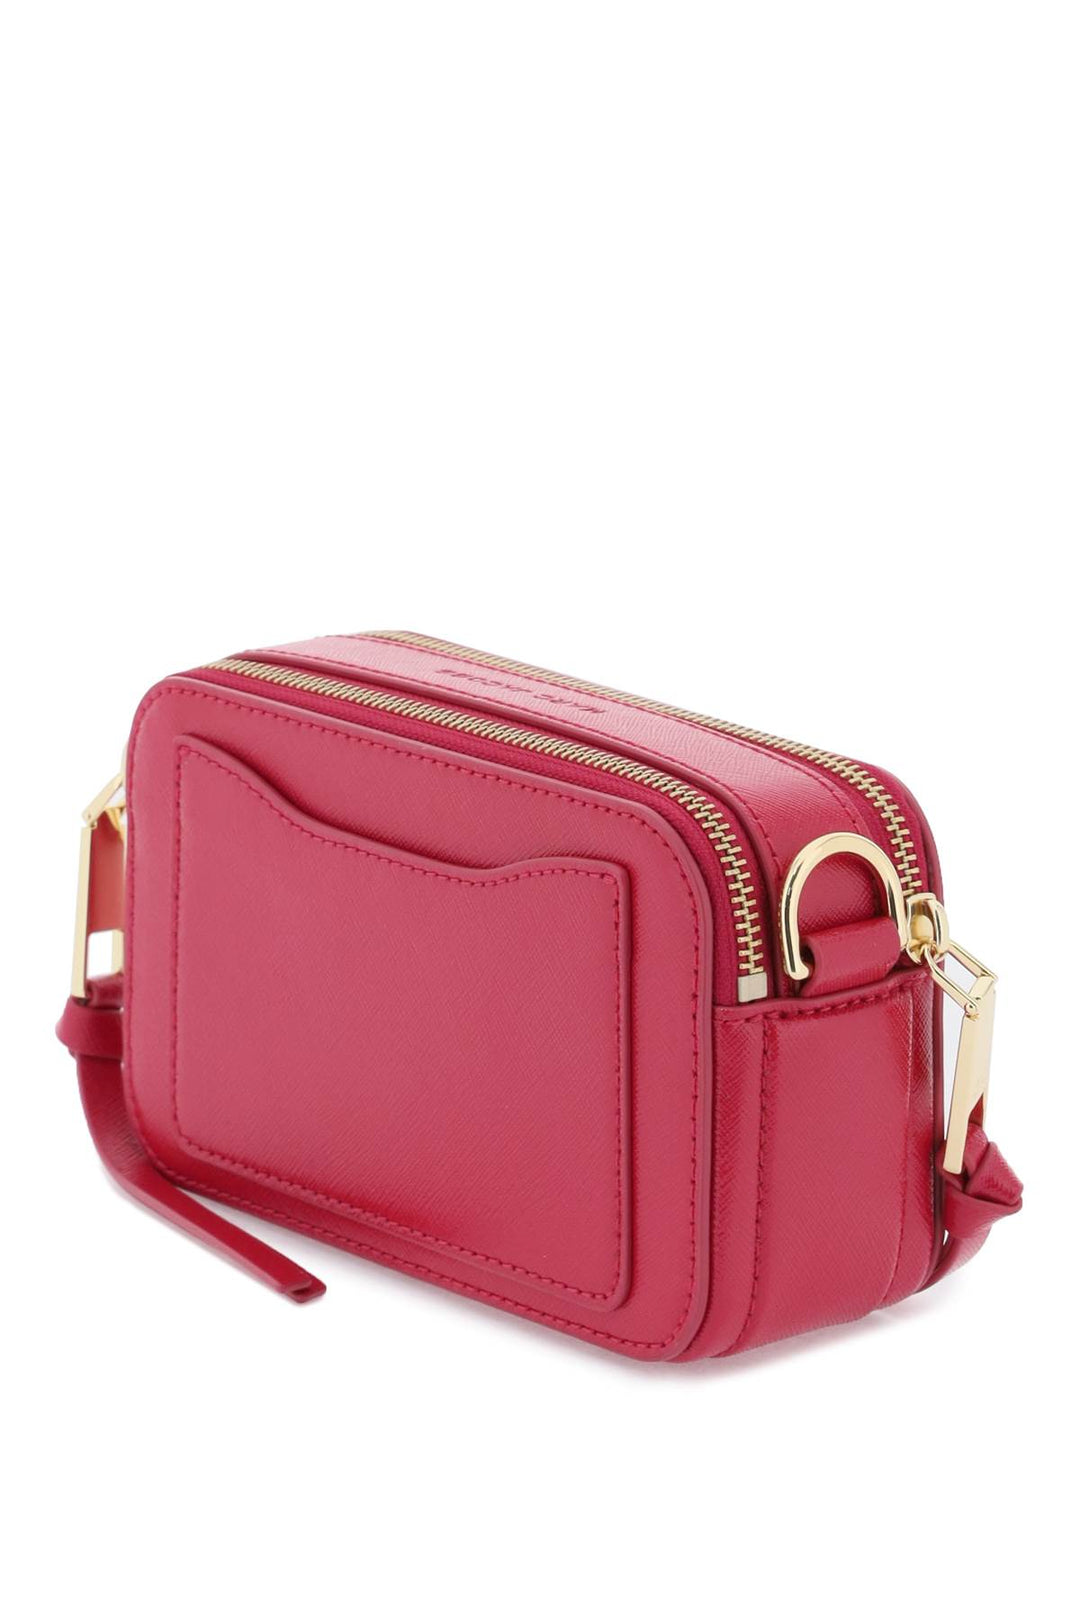 Marc Jacobs The Utility Snapshot Camera Bag   Fuxia